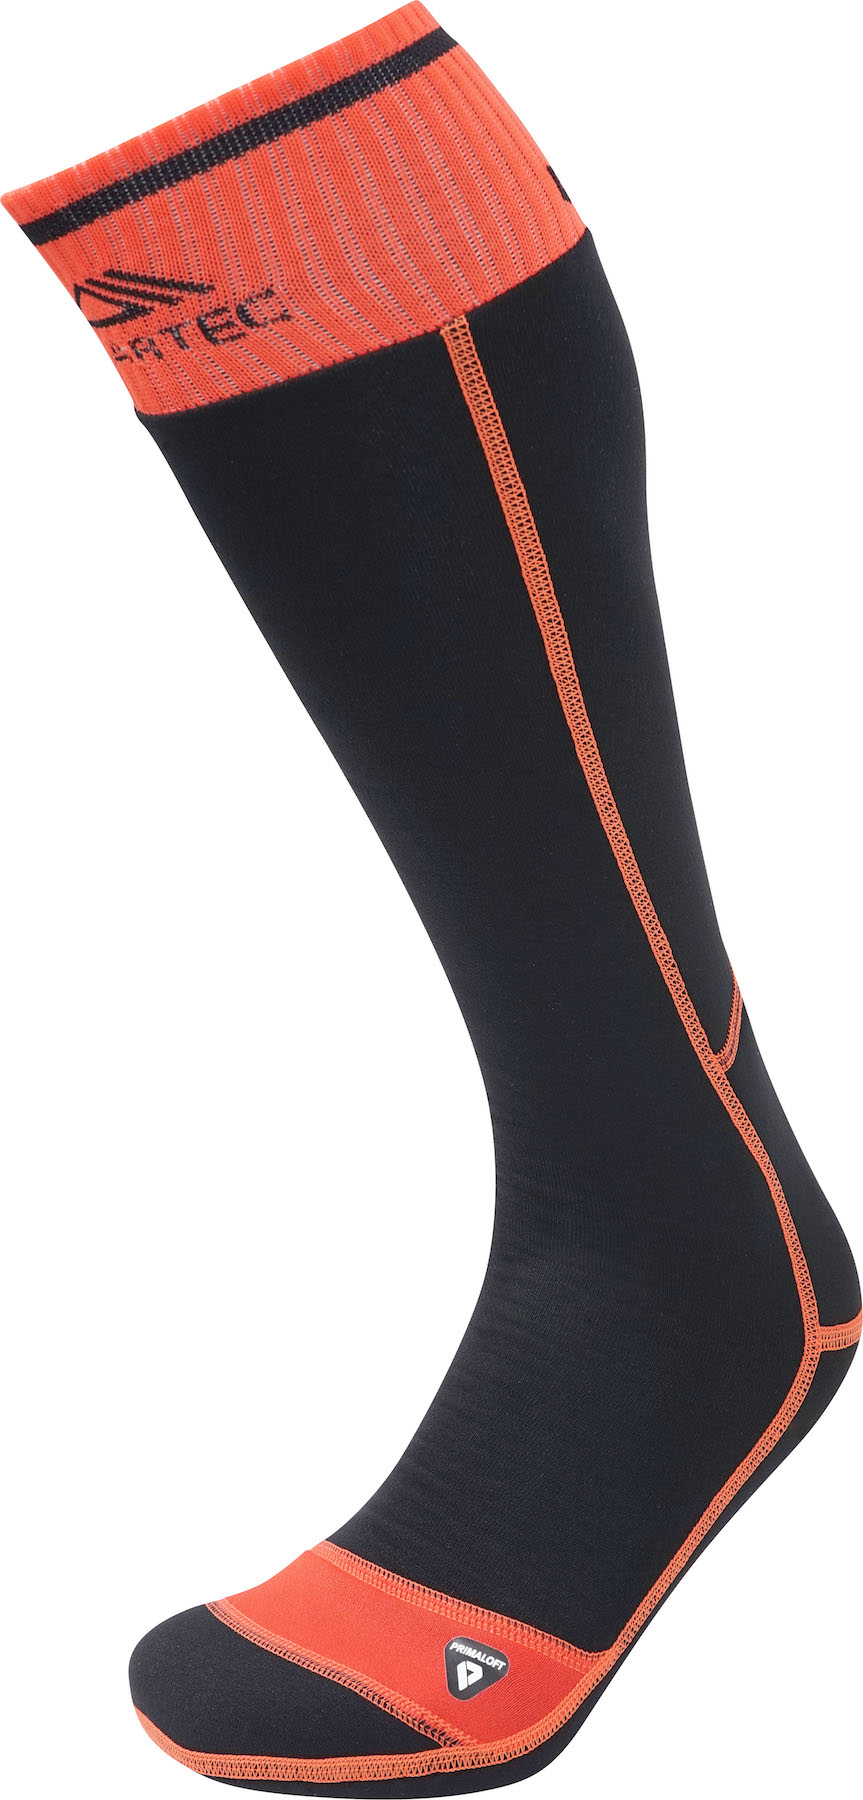 Lorpen T3+ Inferno Expedition Polartec - Chaussettes ski